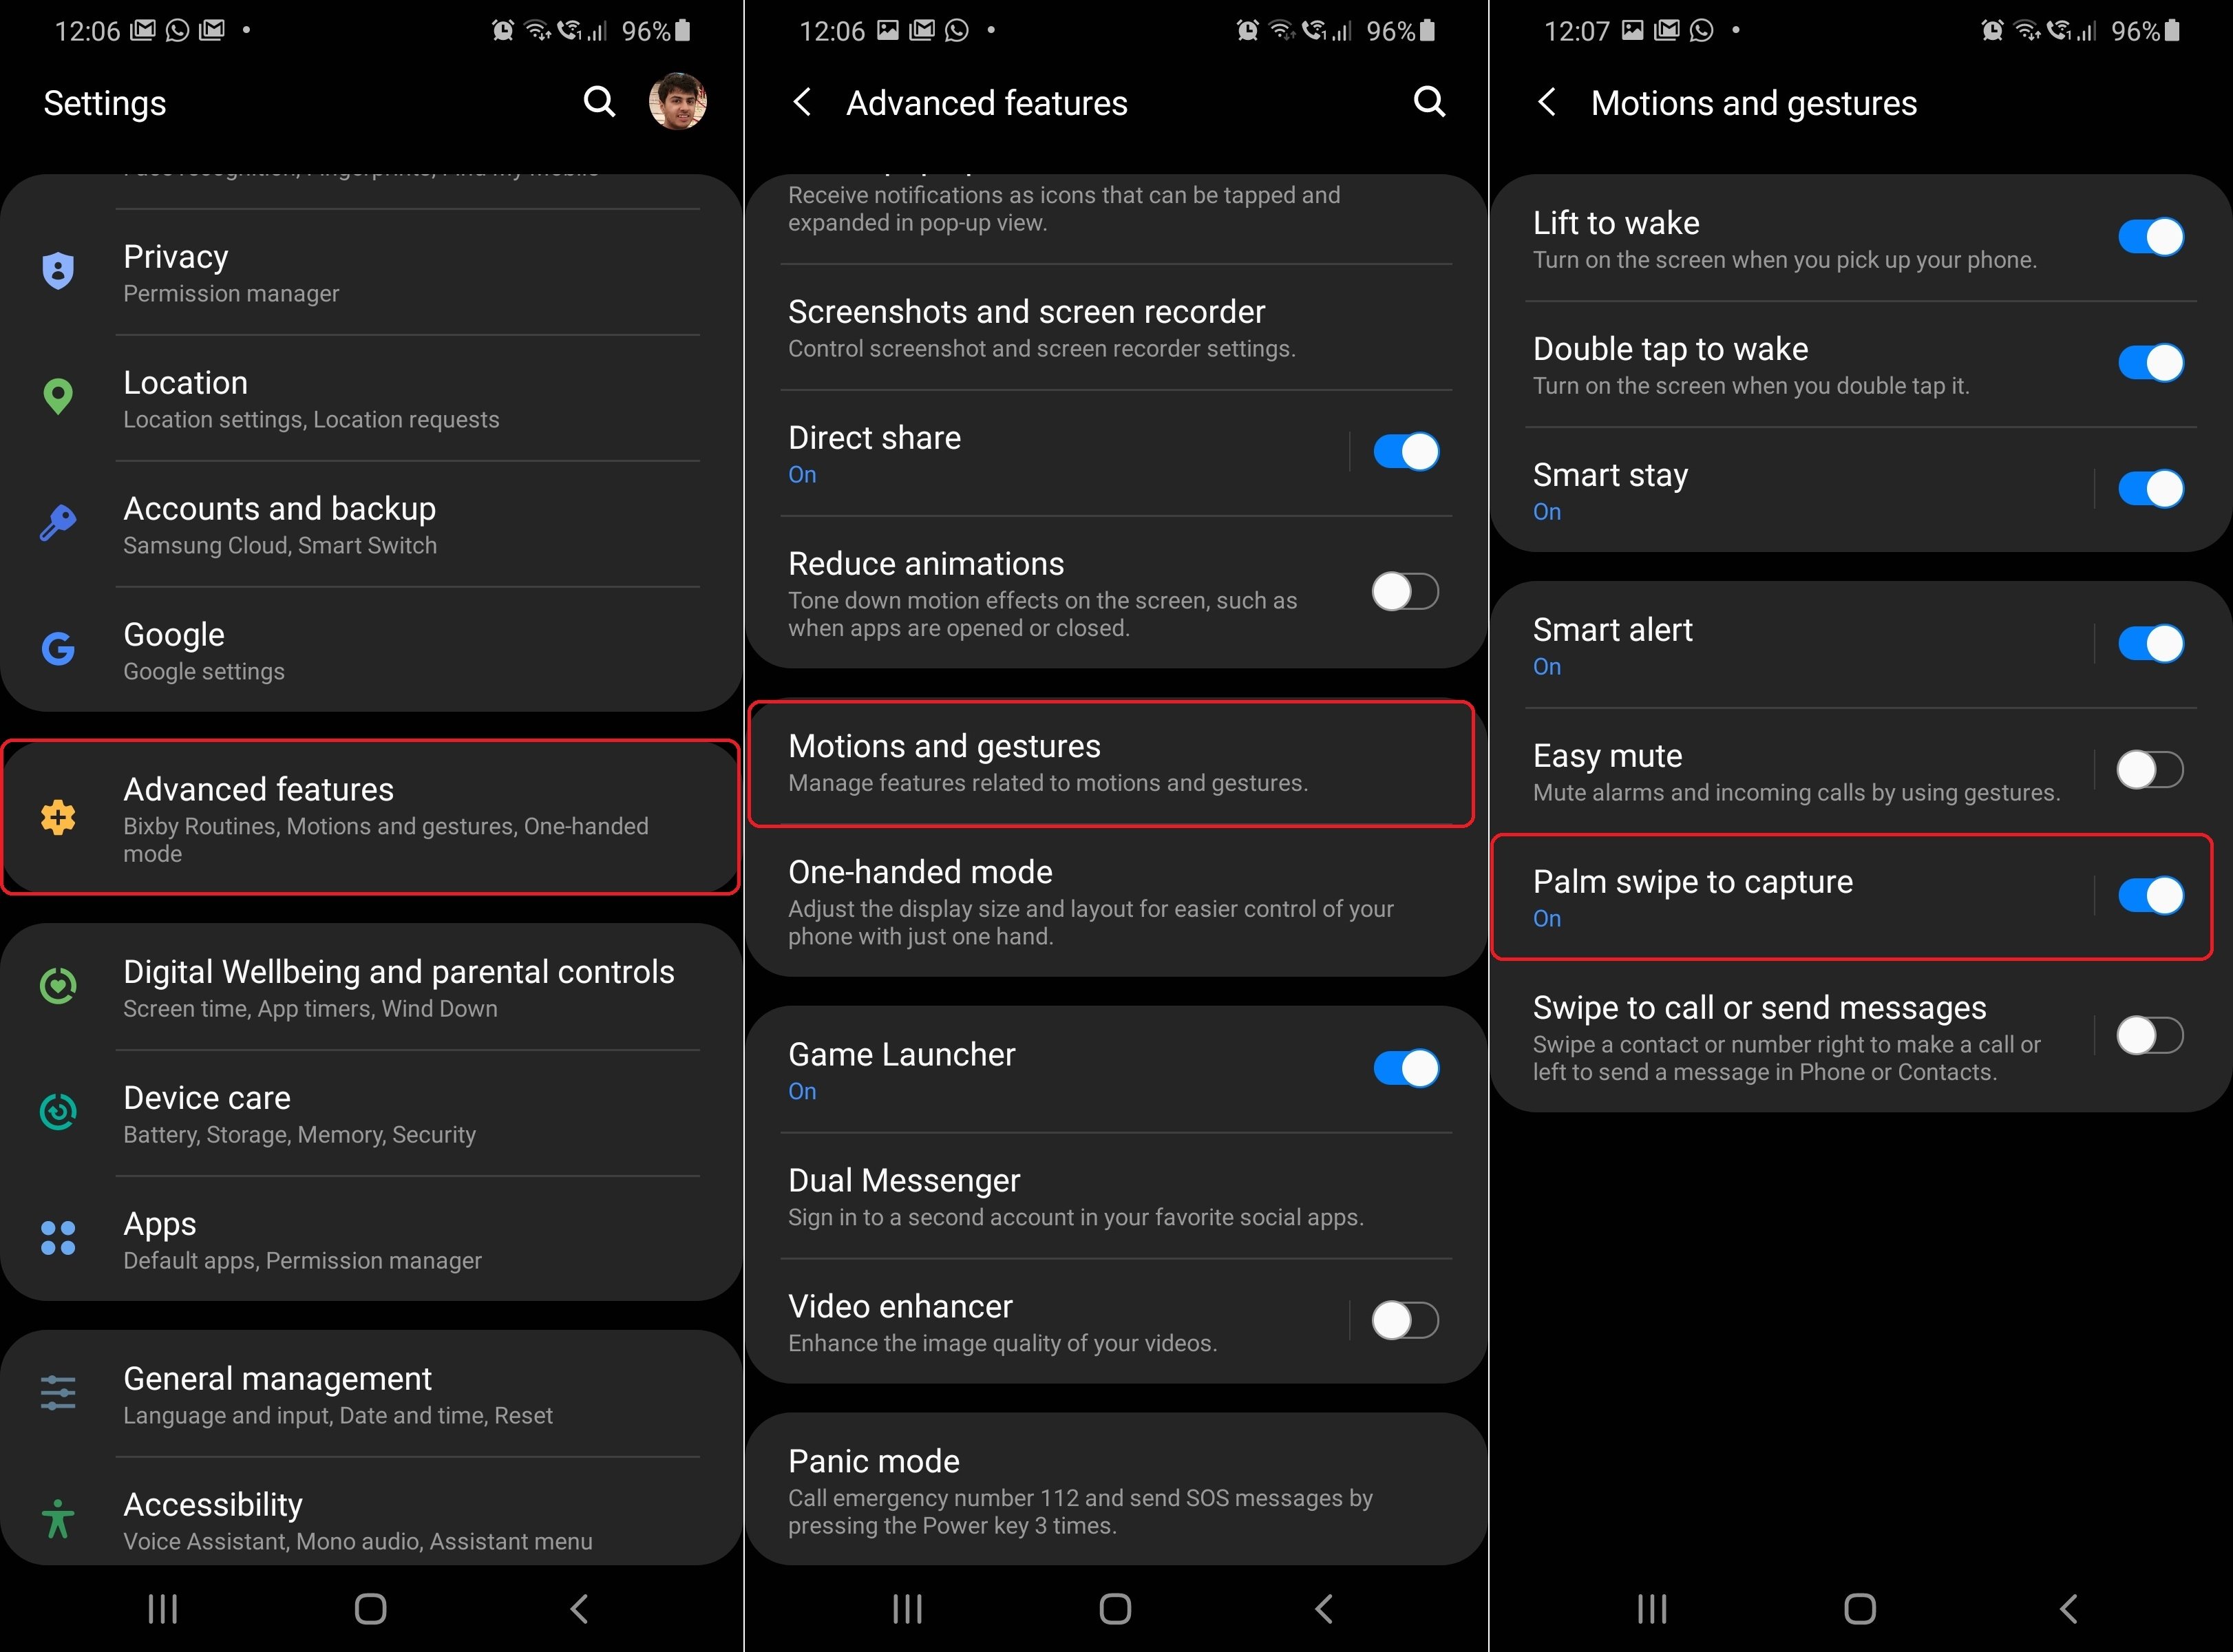 Here's every method for taking screenshots on the Galaxy S20 - SamMobile